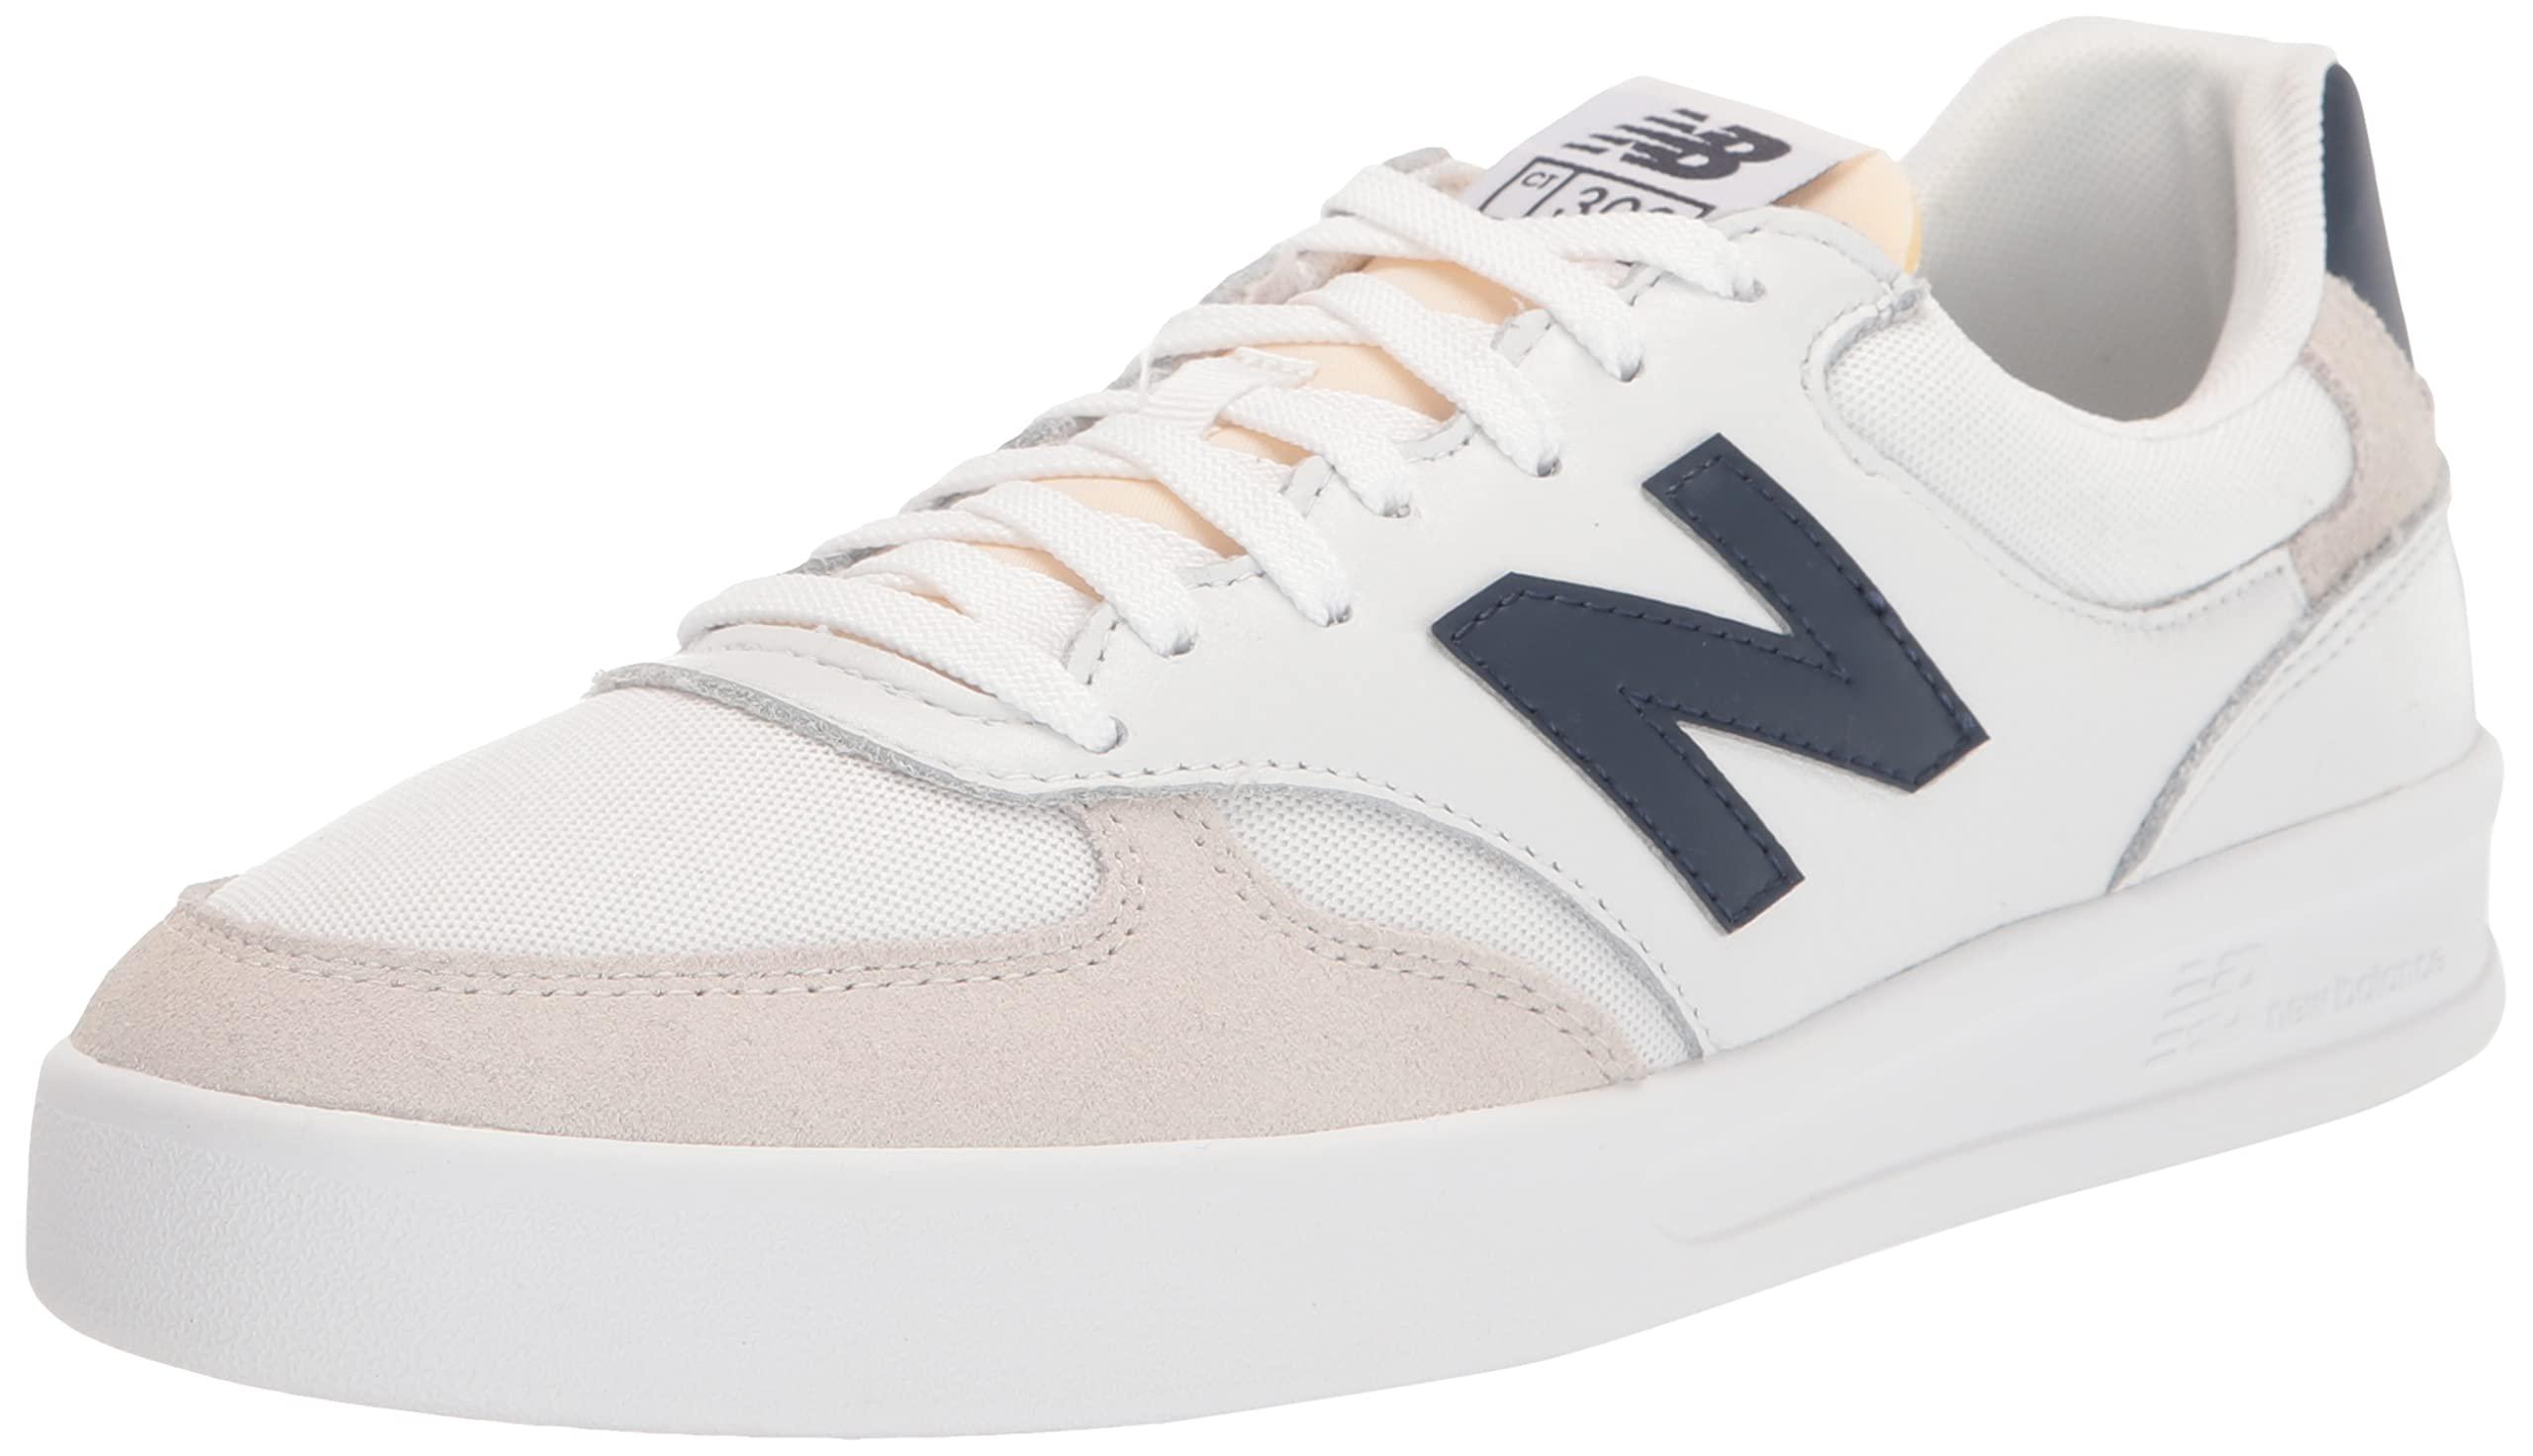 punch Meyella Verdachte New Balance Ct300 Wg3 White Navy Low Top Sneaker Shoes 9.5 for Men | Lyst